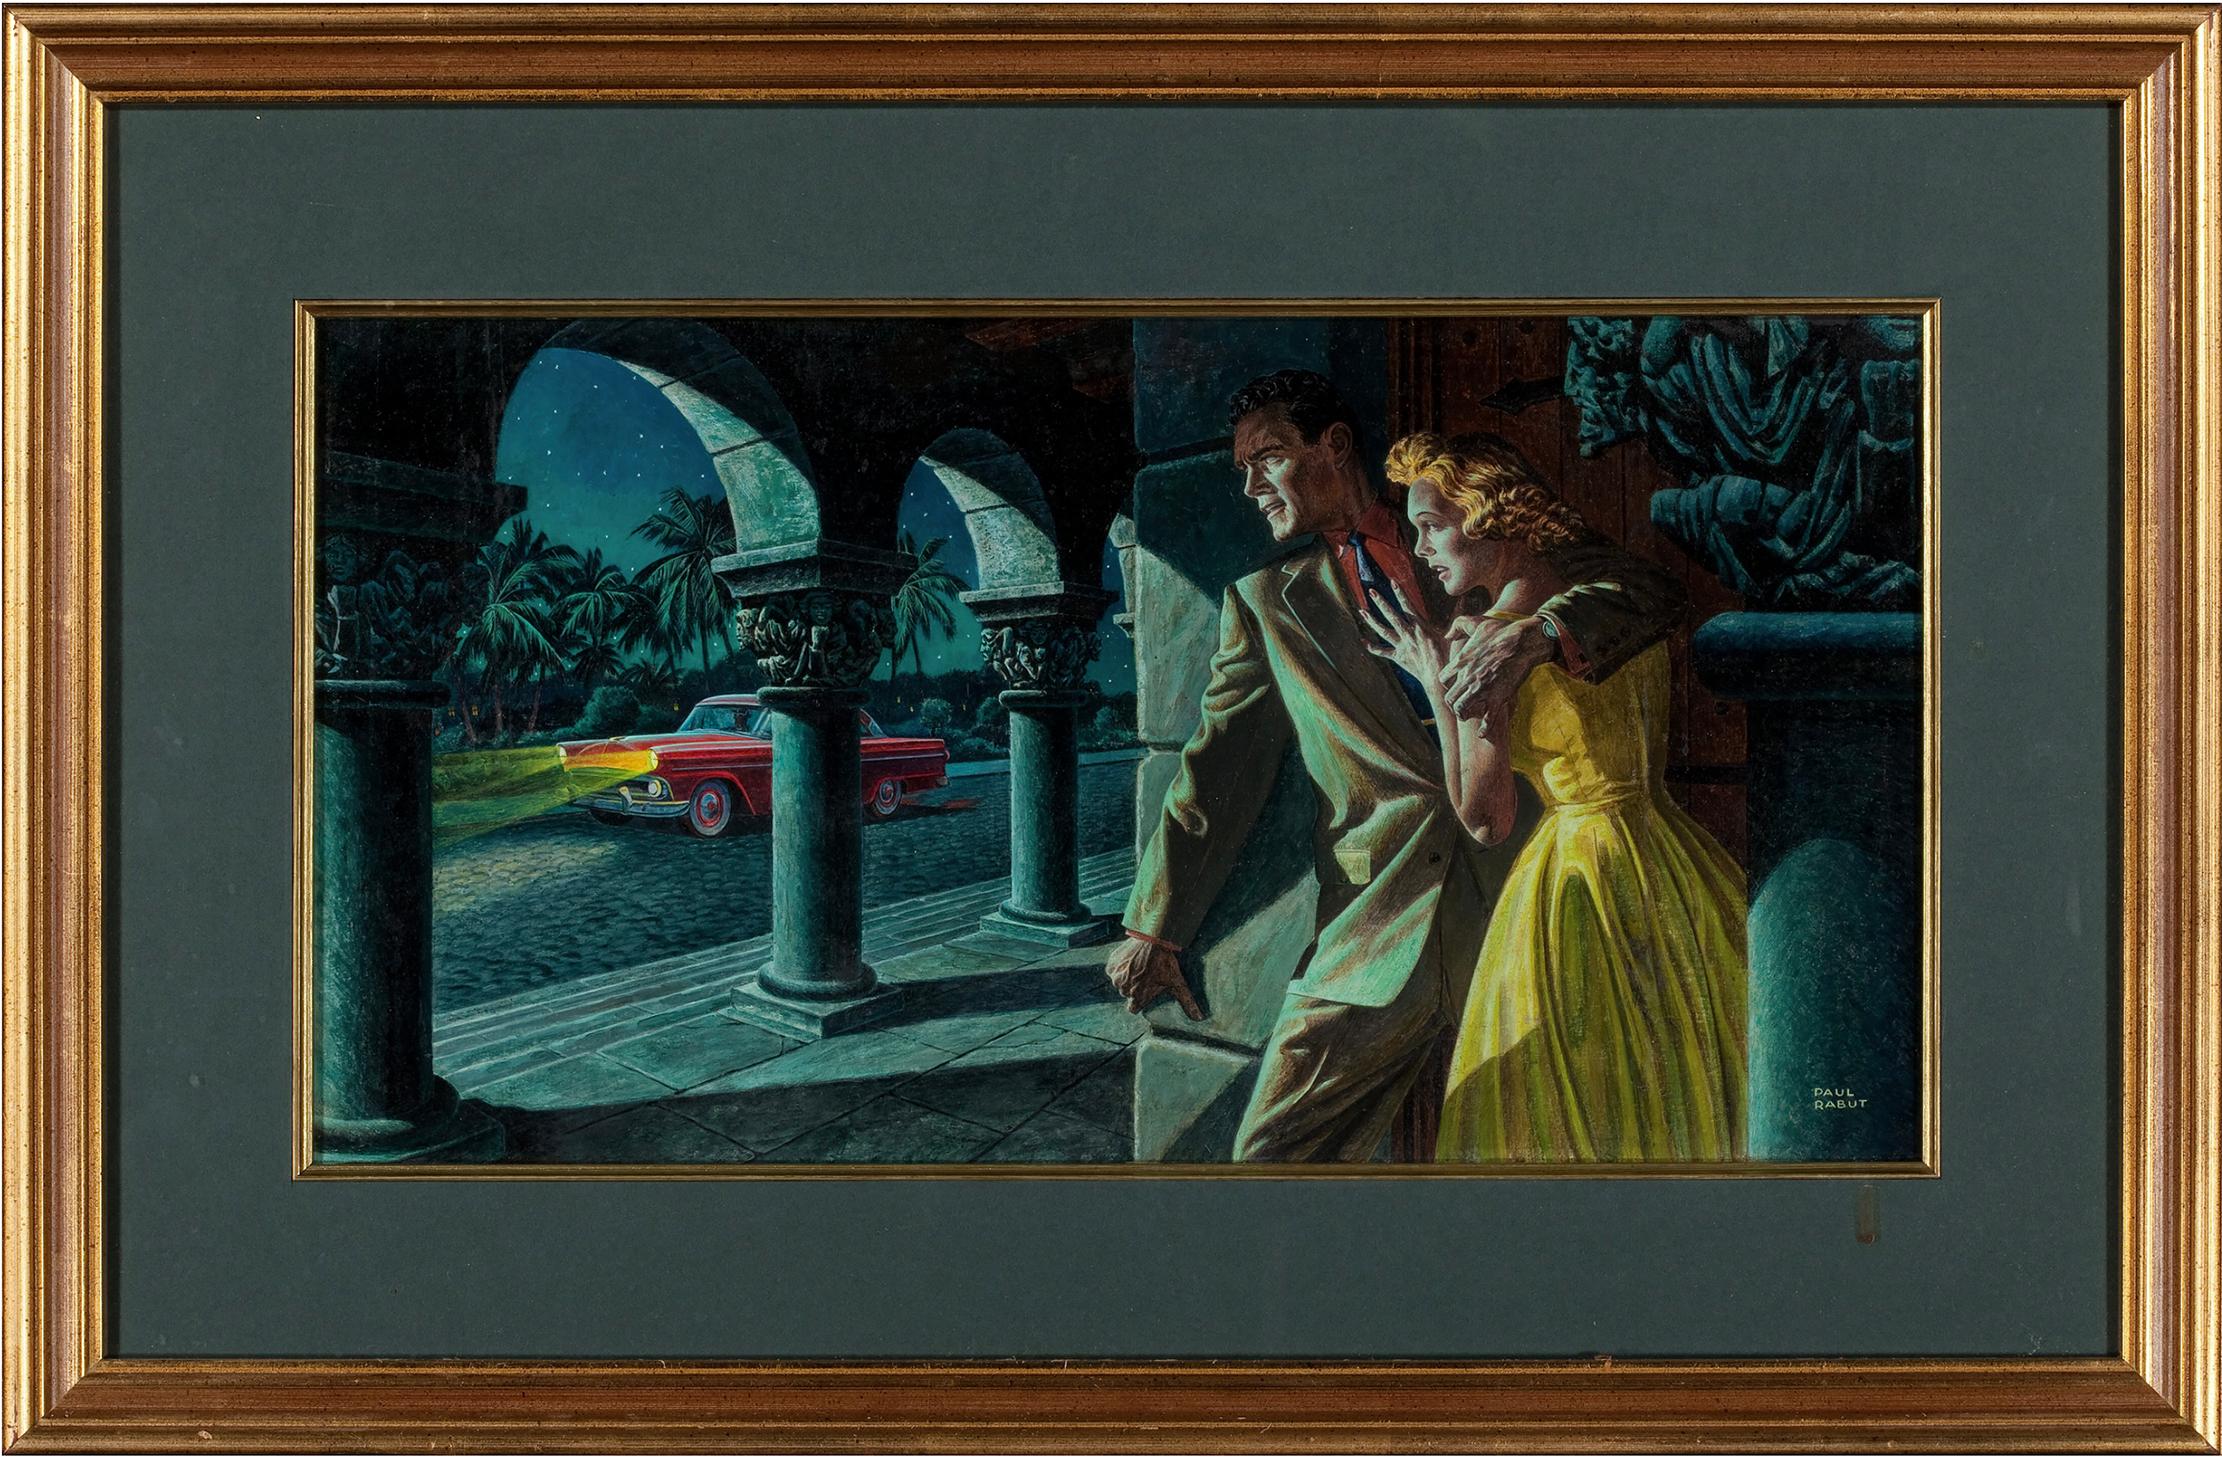  Film Noir. Pulp Mystery That police officer knows you. Saturday Evening Post - Painting by Paul Rabut